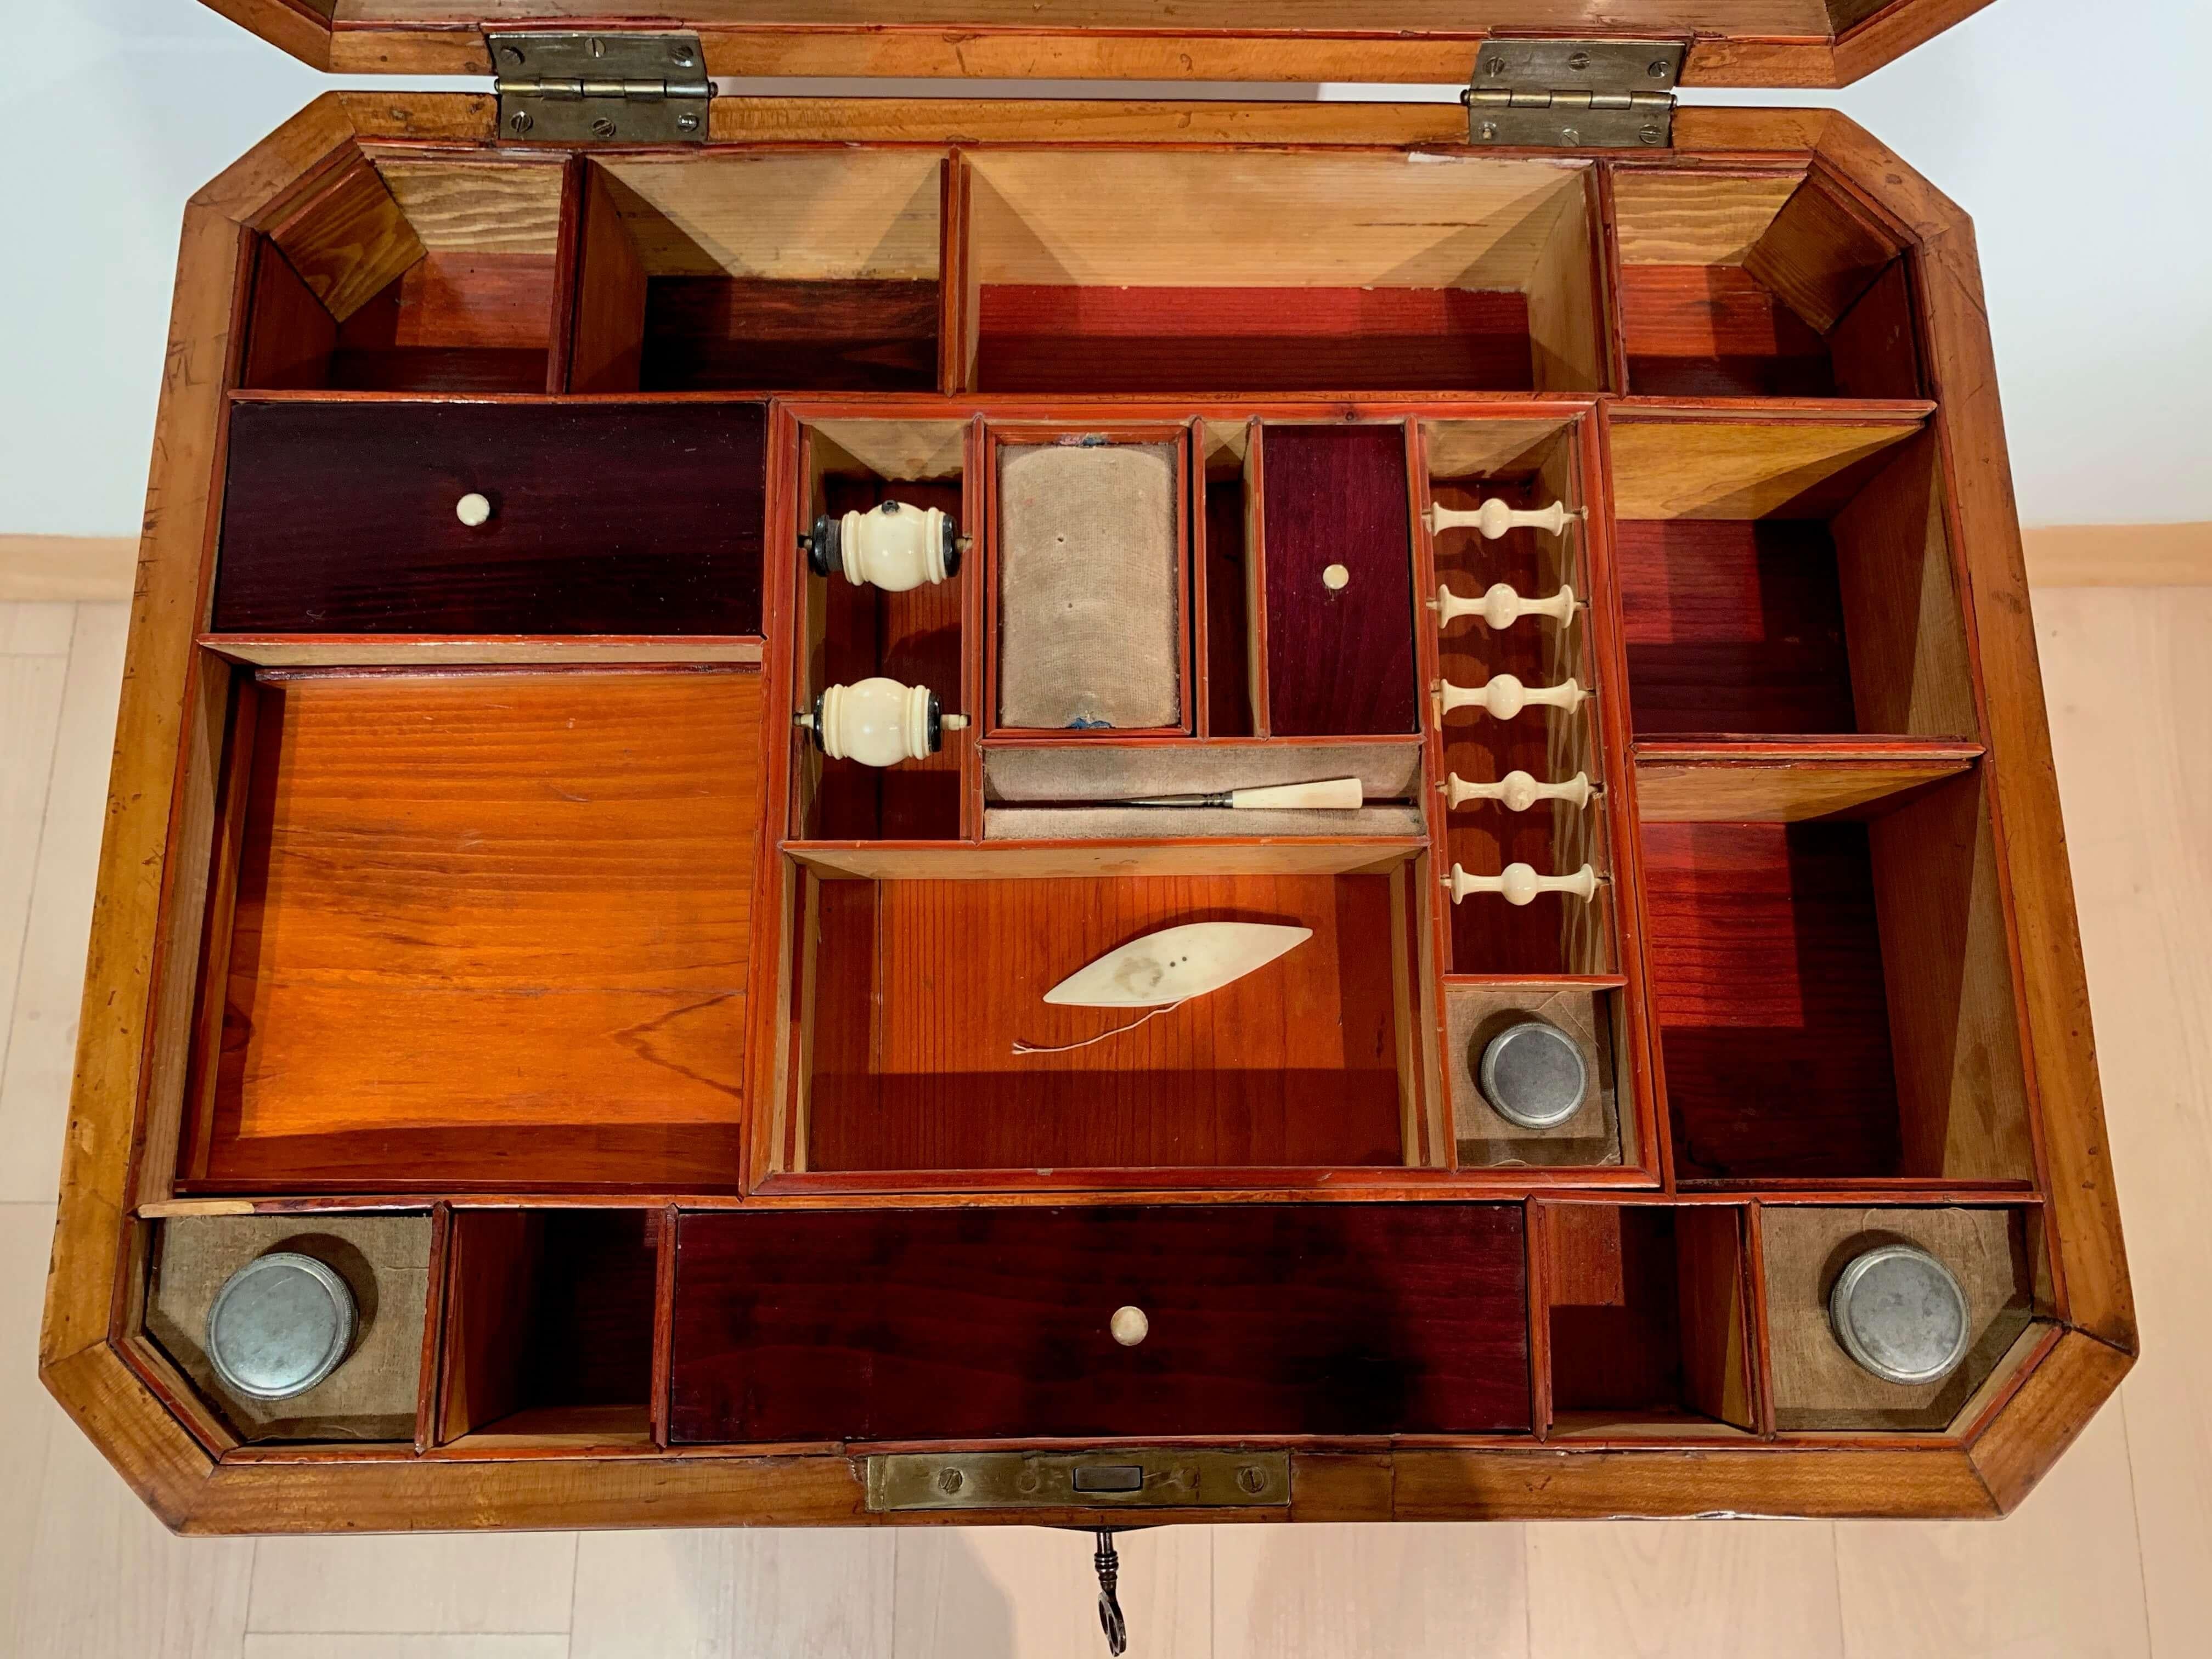 Early 19th Century Biedermeier Sewing Table with Interior, Cherry Veneer, South Germany, circa 1825